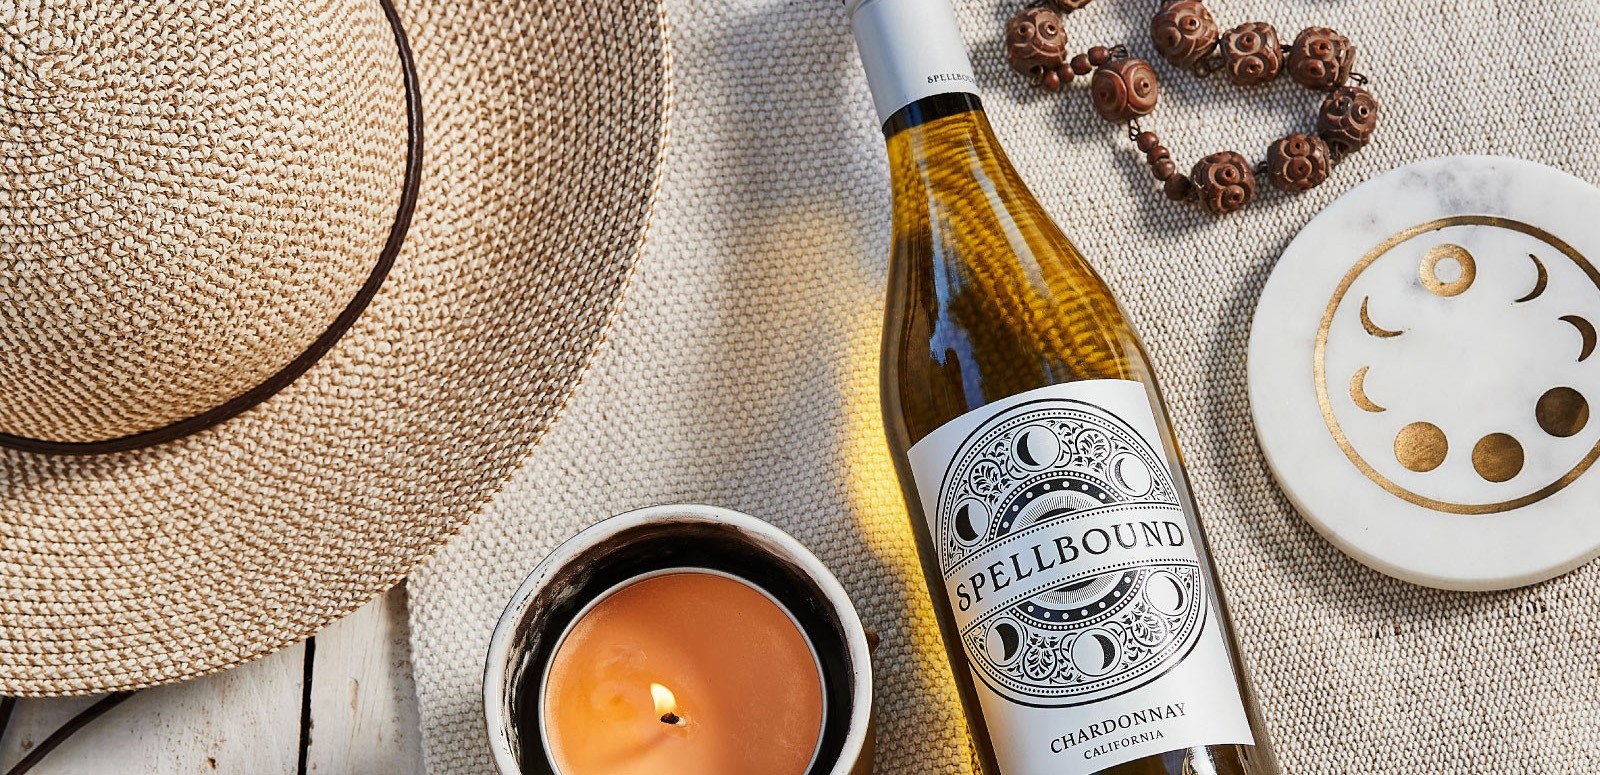 Spellbound chardonnay on table with candle